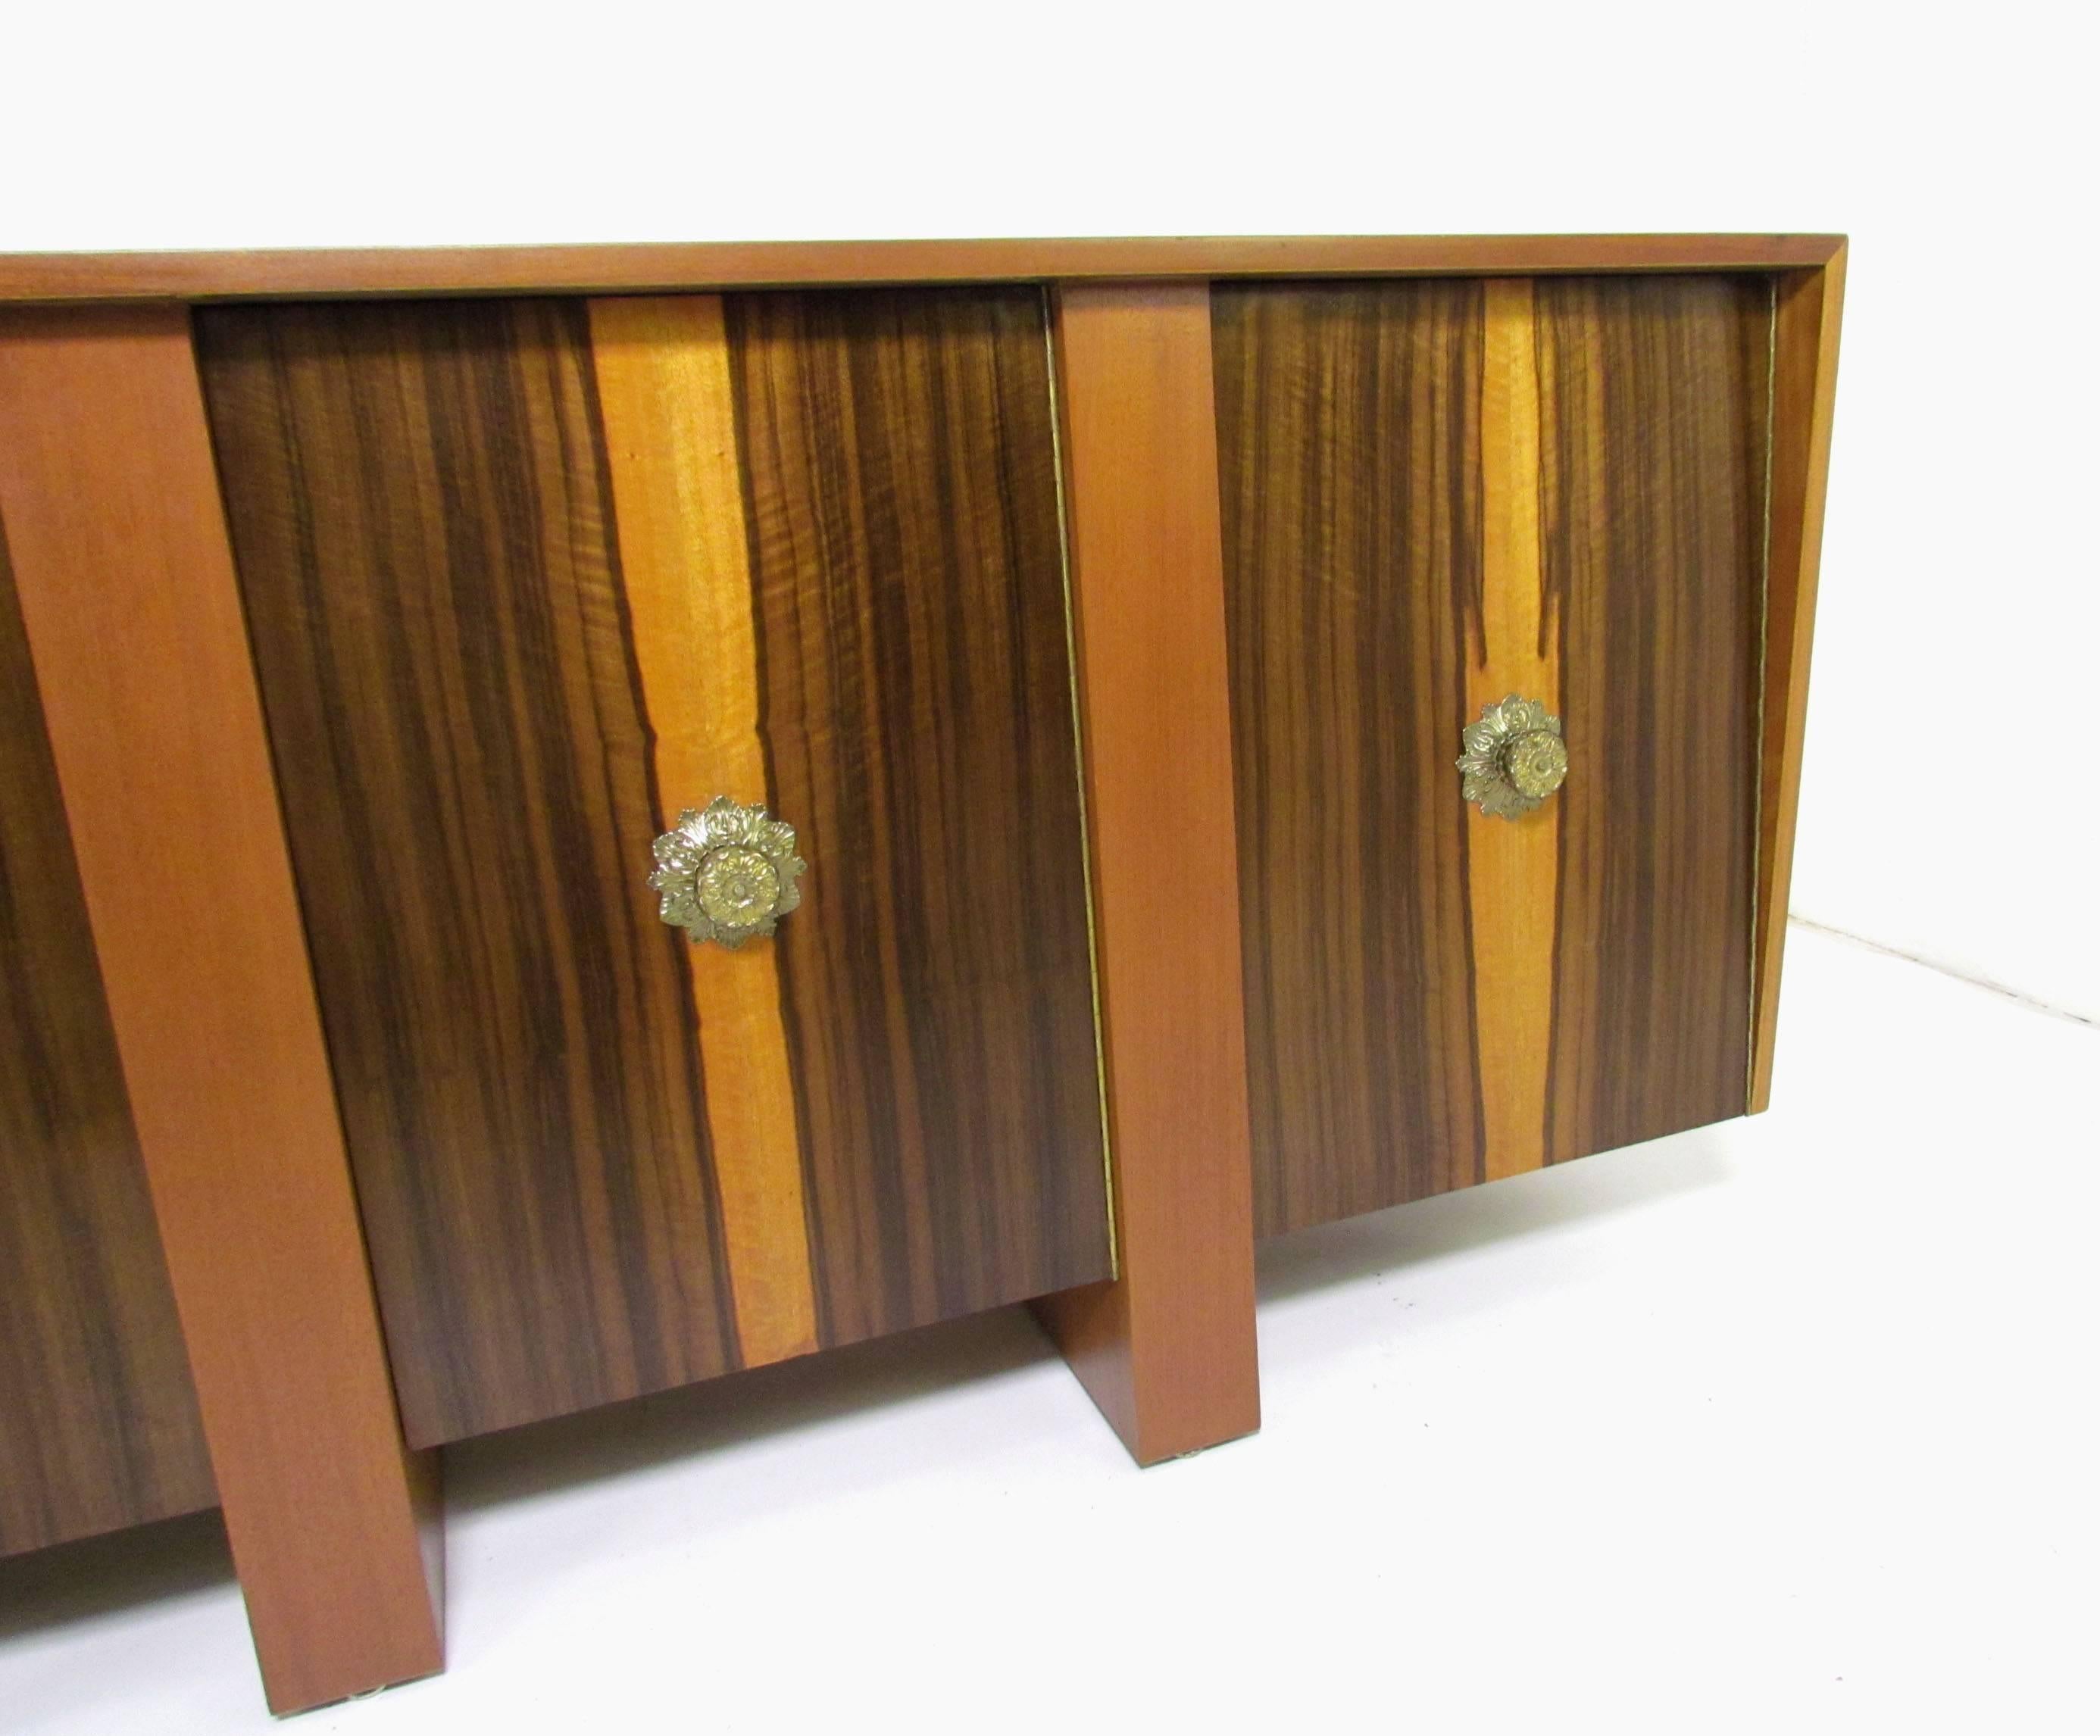 Stunning custom-made seven and a half-foot long sideboard with zebrawood doors and Honduran mahogany case, by Adolfo Genovese for F & G Handmade Furniture Co, circa late 1950s. Middle sections feature drawers for flatware and other storage, while